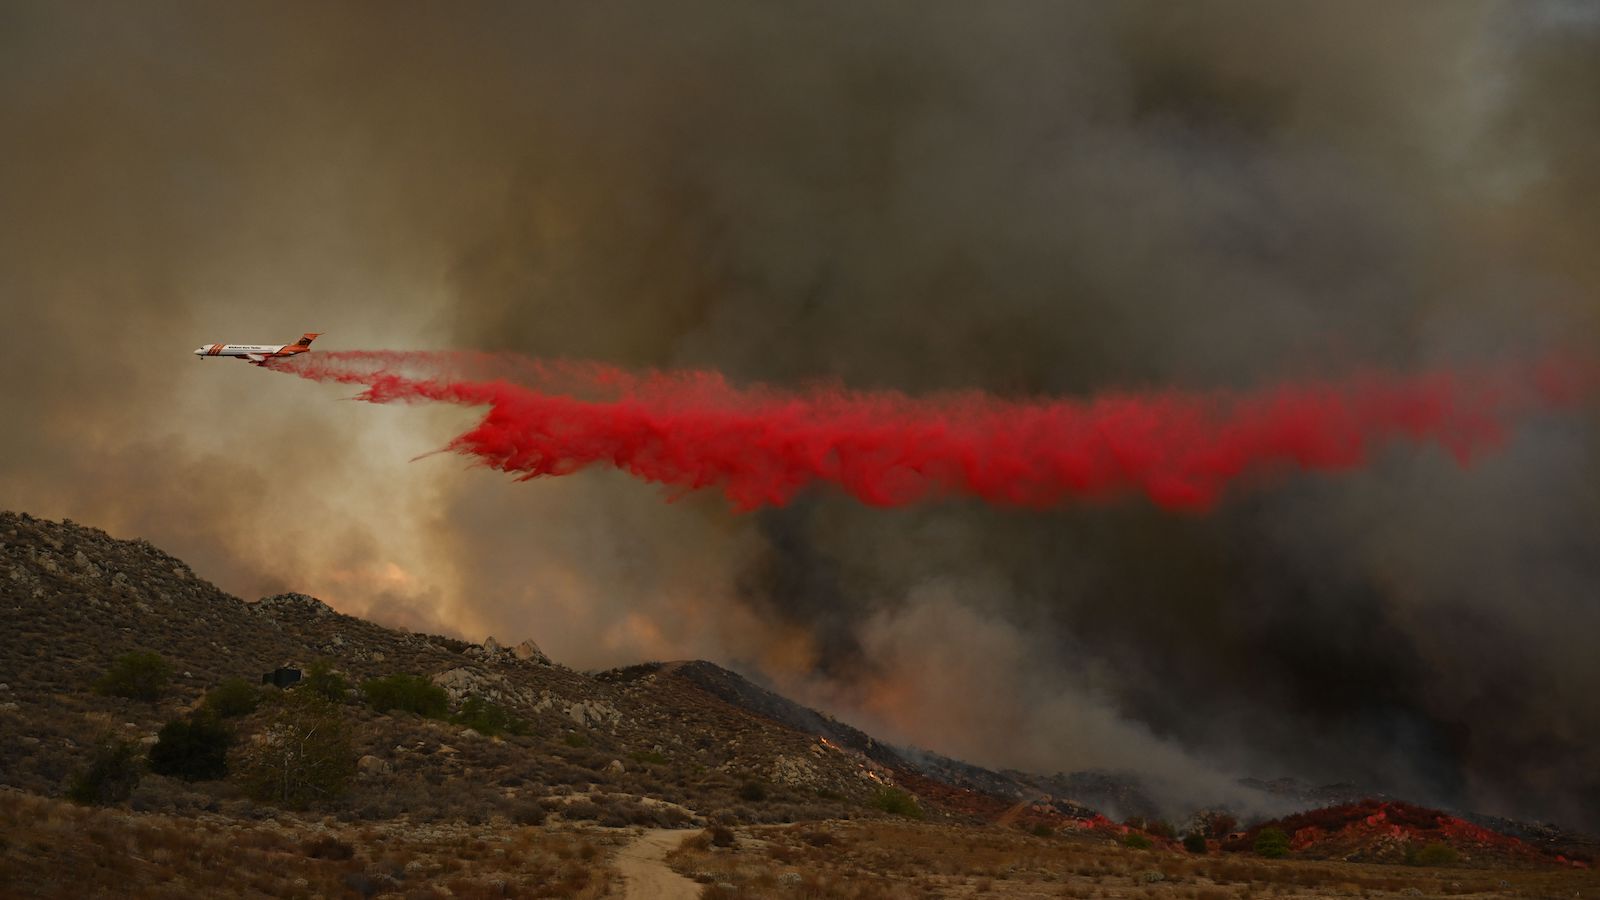 The Erickson Aero Tanker 107 MD-87 firefighting aircraft makes a drop of retardant to contain a wildfire as it approaches homes during the Fairview Fire near Hemet, California in Riverside County on September 7, 2022.